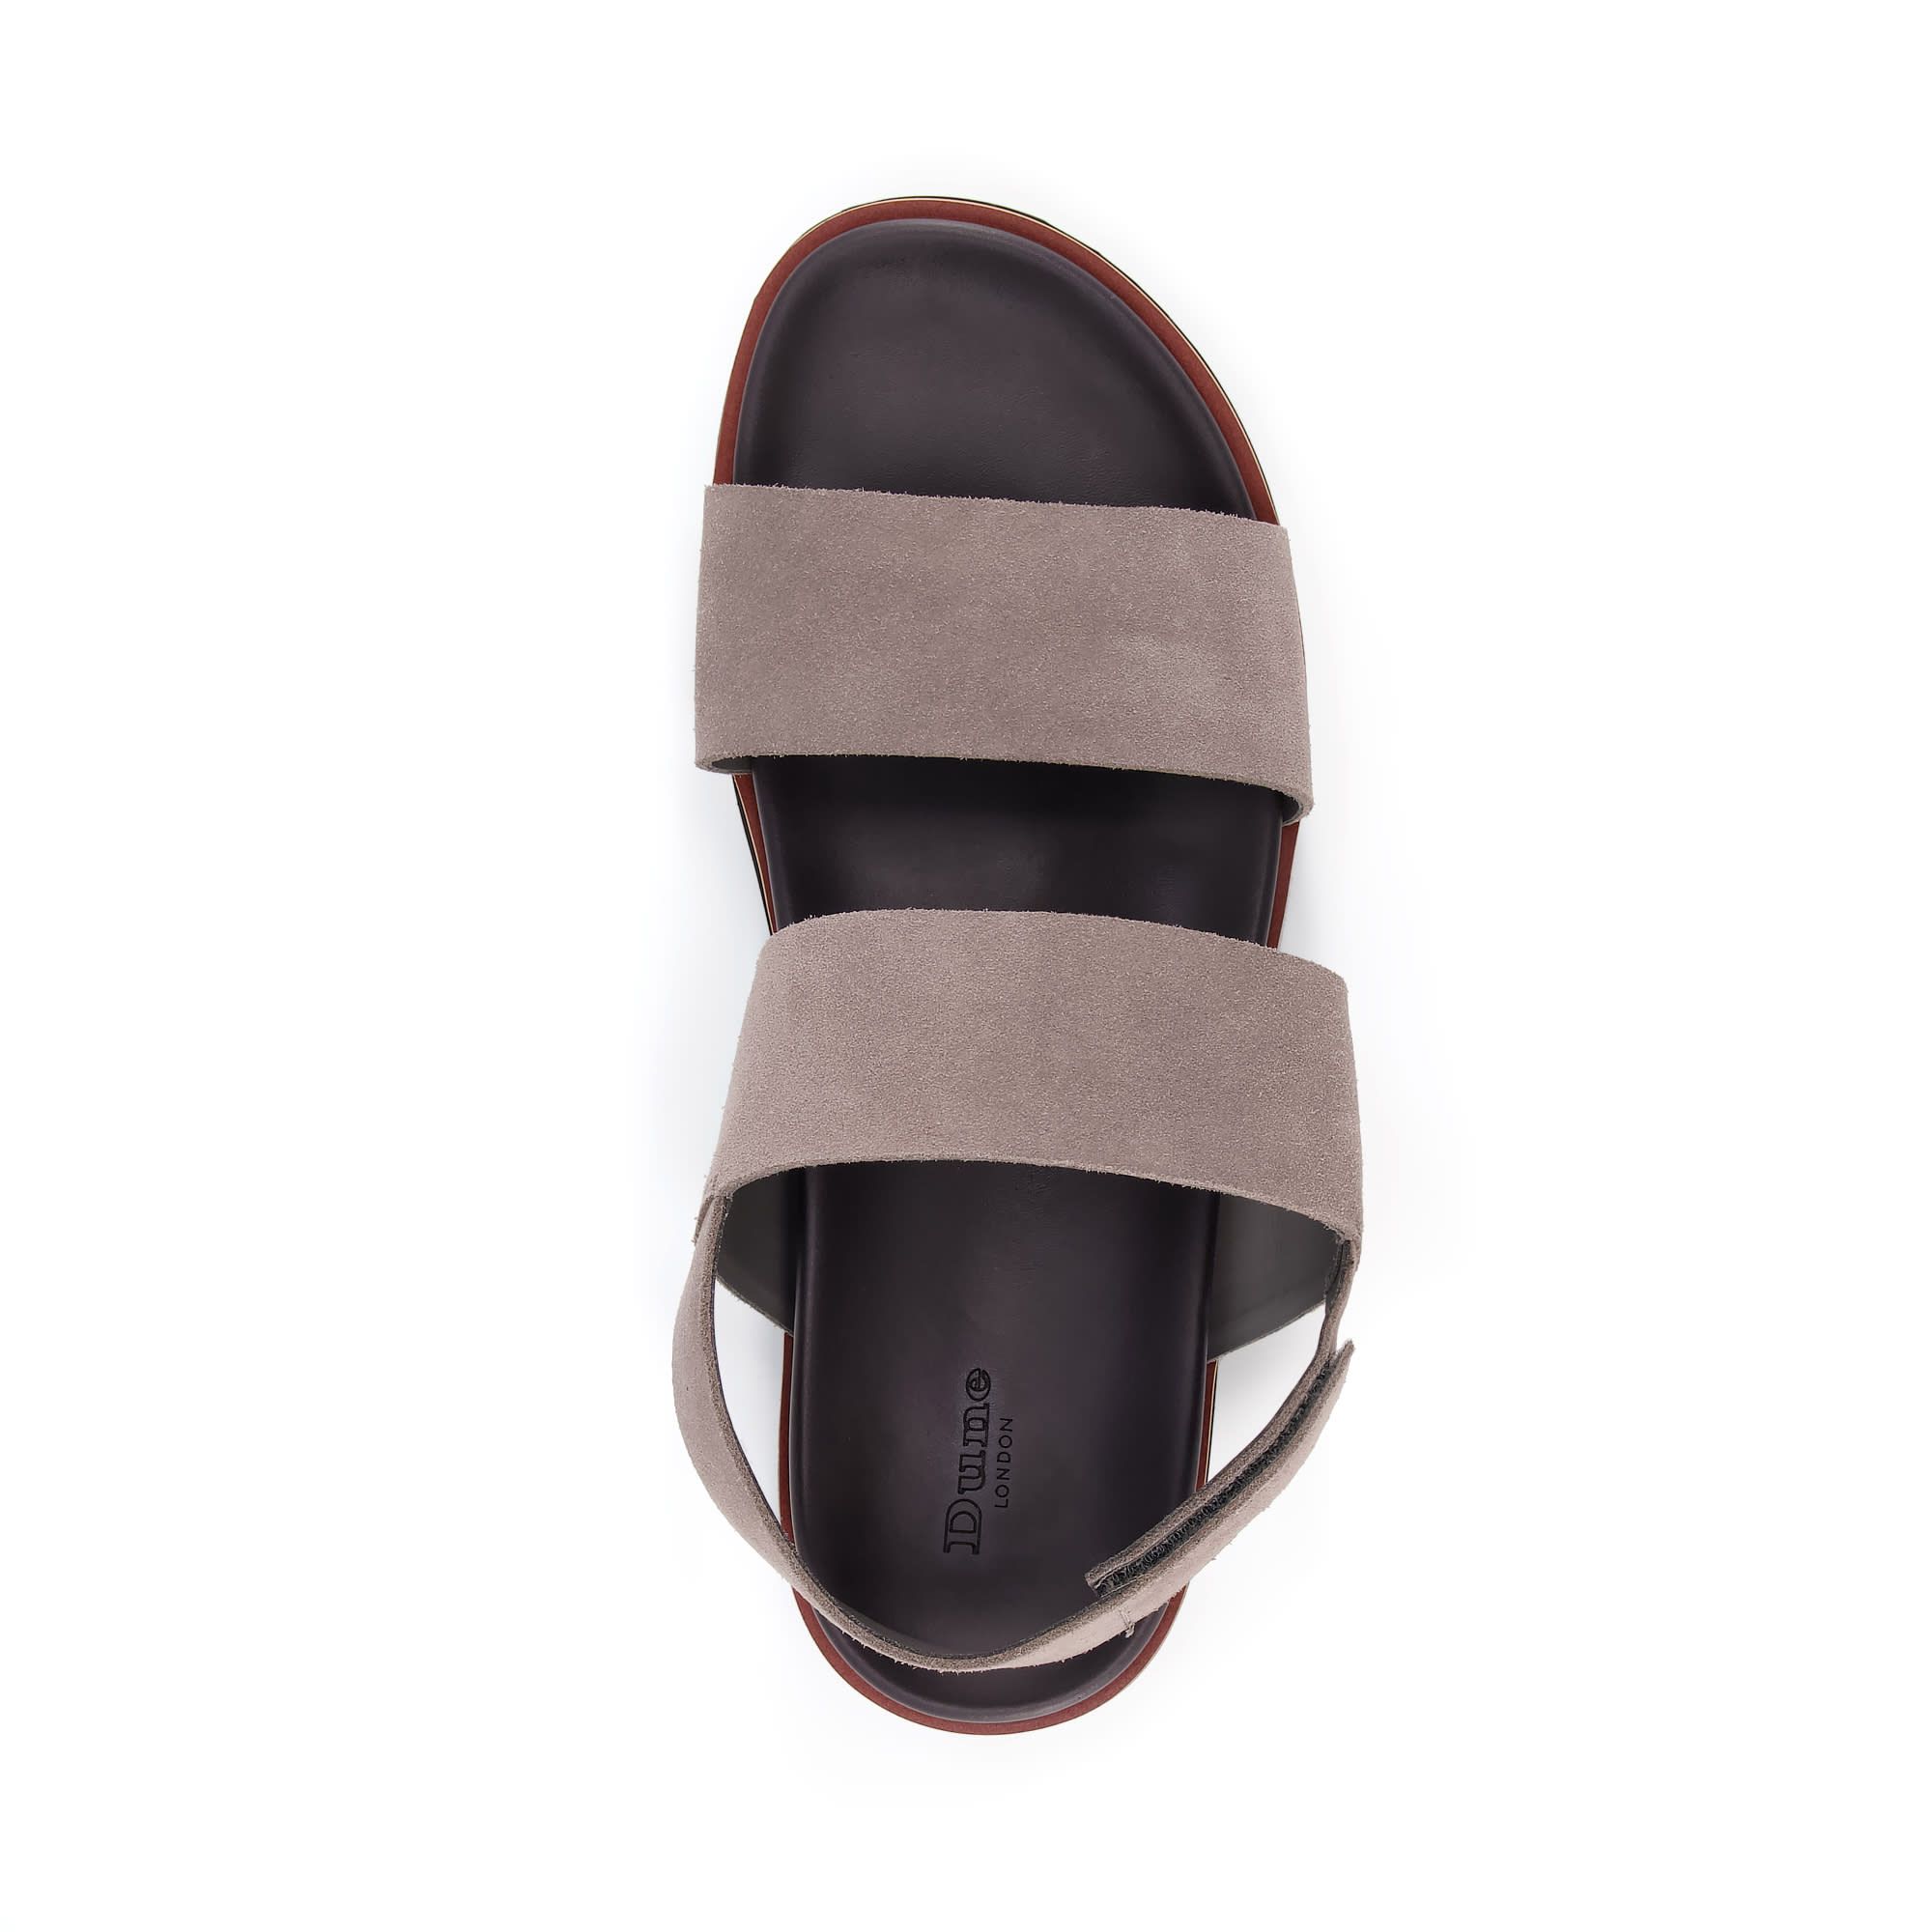 Relaxed Summer footwear never looked so good. Crafted from smooth black leather with a utilitarian velcro heel fastening. Tick off the trends and enjoy all-day comfort thanks to these sandals.